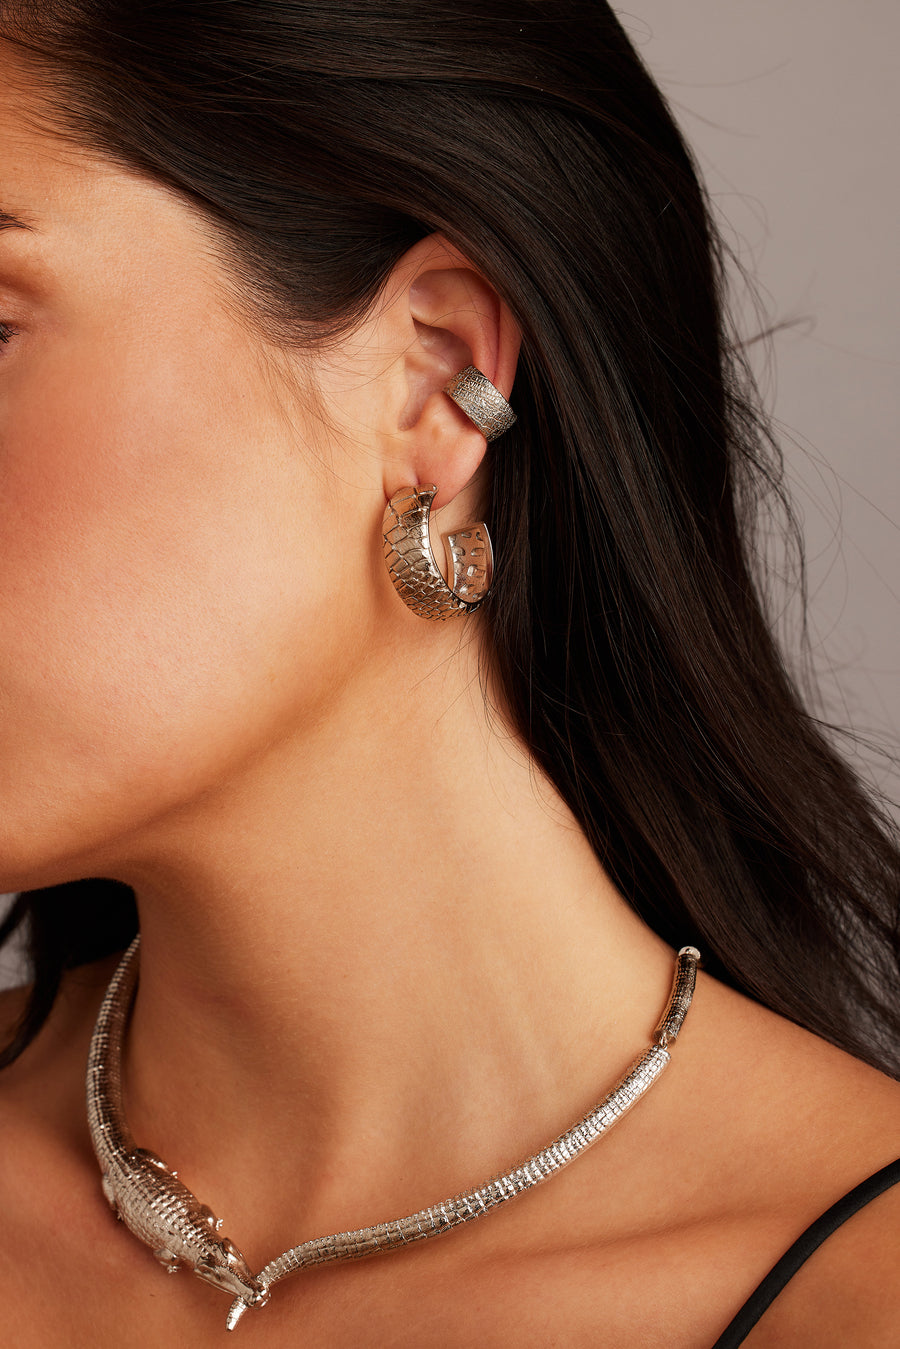 Woman wearing the Desert Darling Earrings in silver, paired with the Croc Kingdom Collar and Desert Darling Ear Cuff